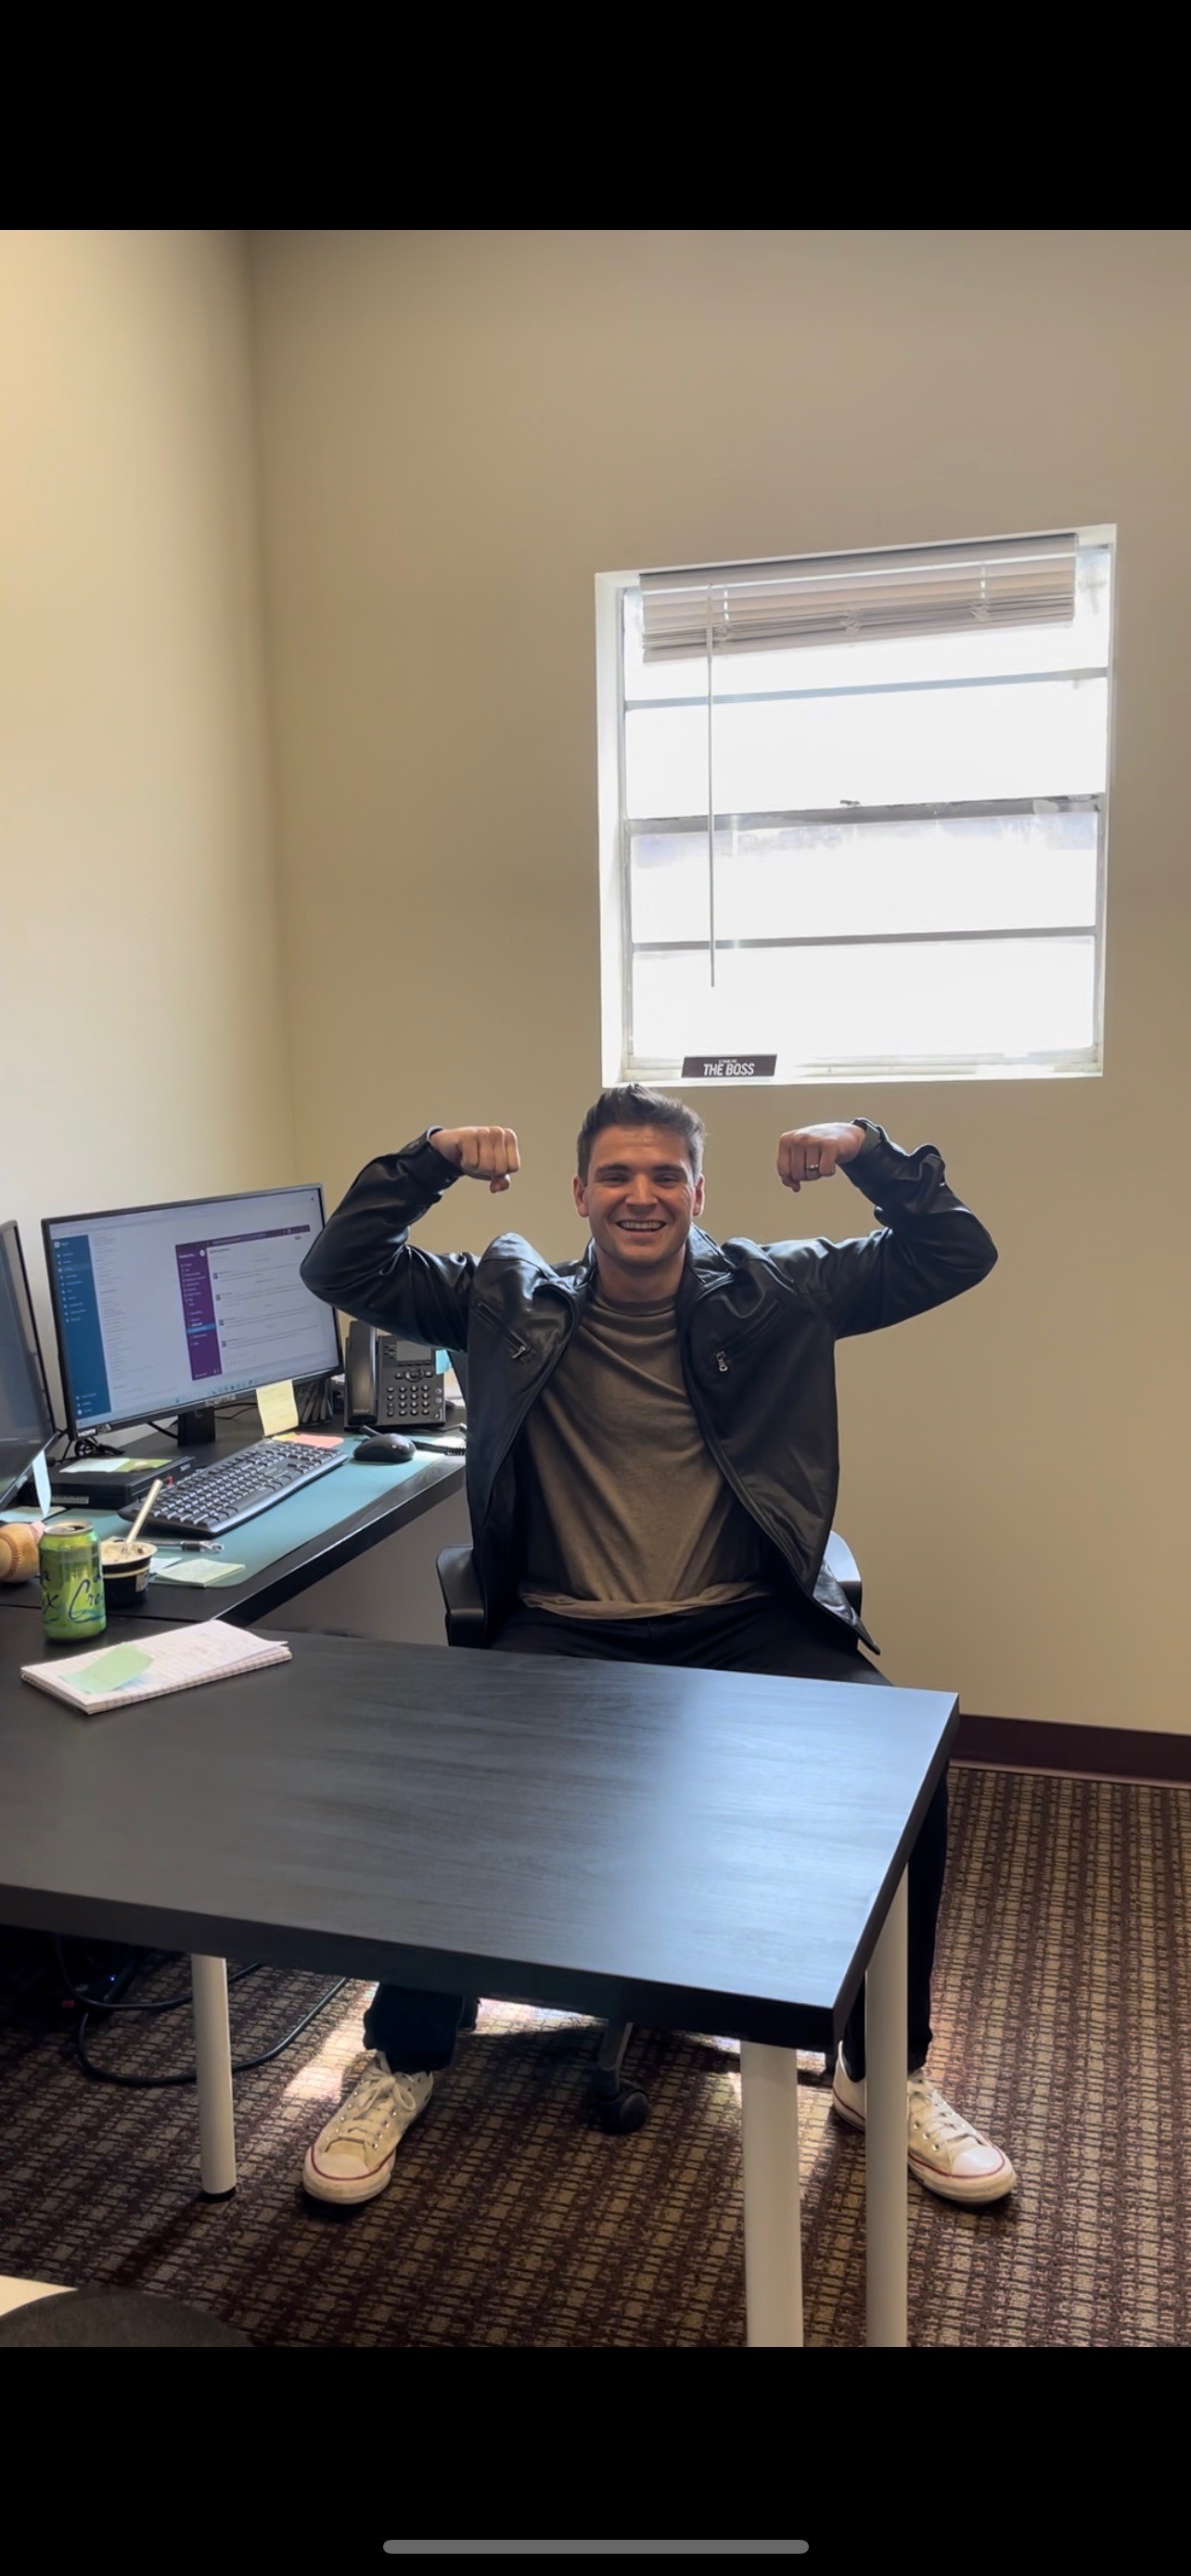 Chris, our leasing specialist, flexing after he processed a new application in record time!